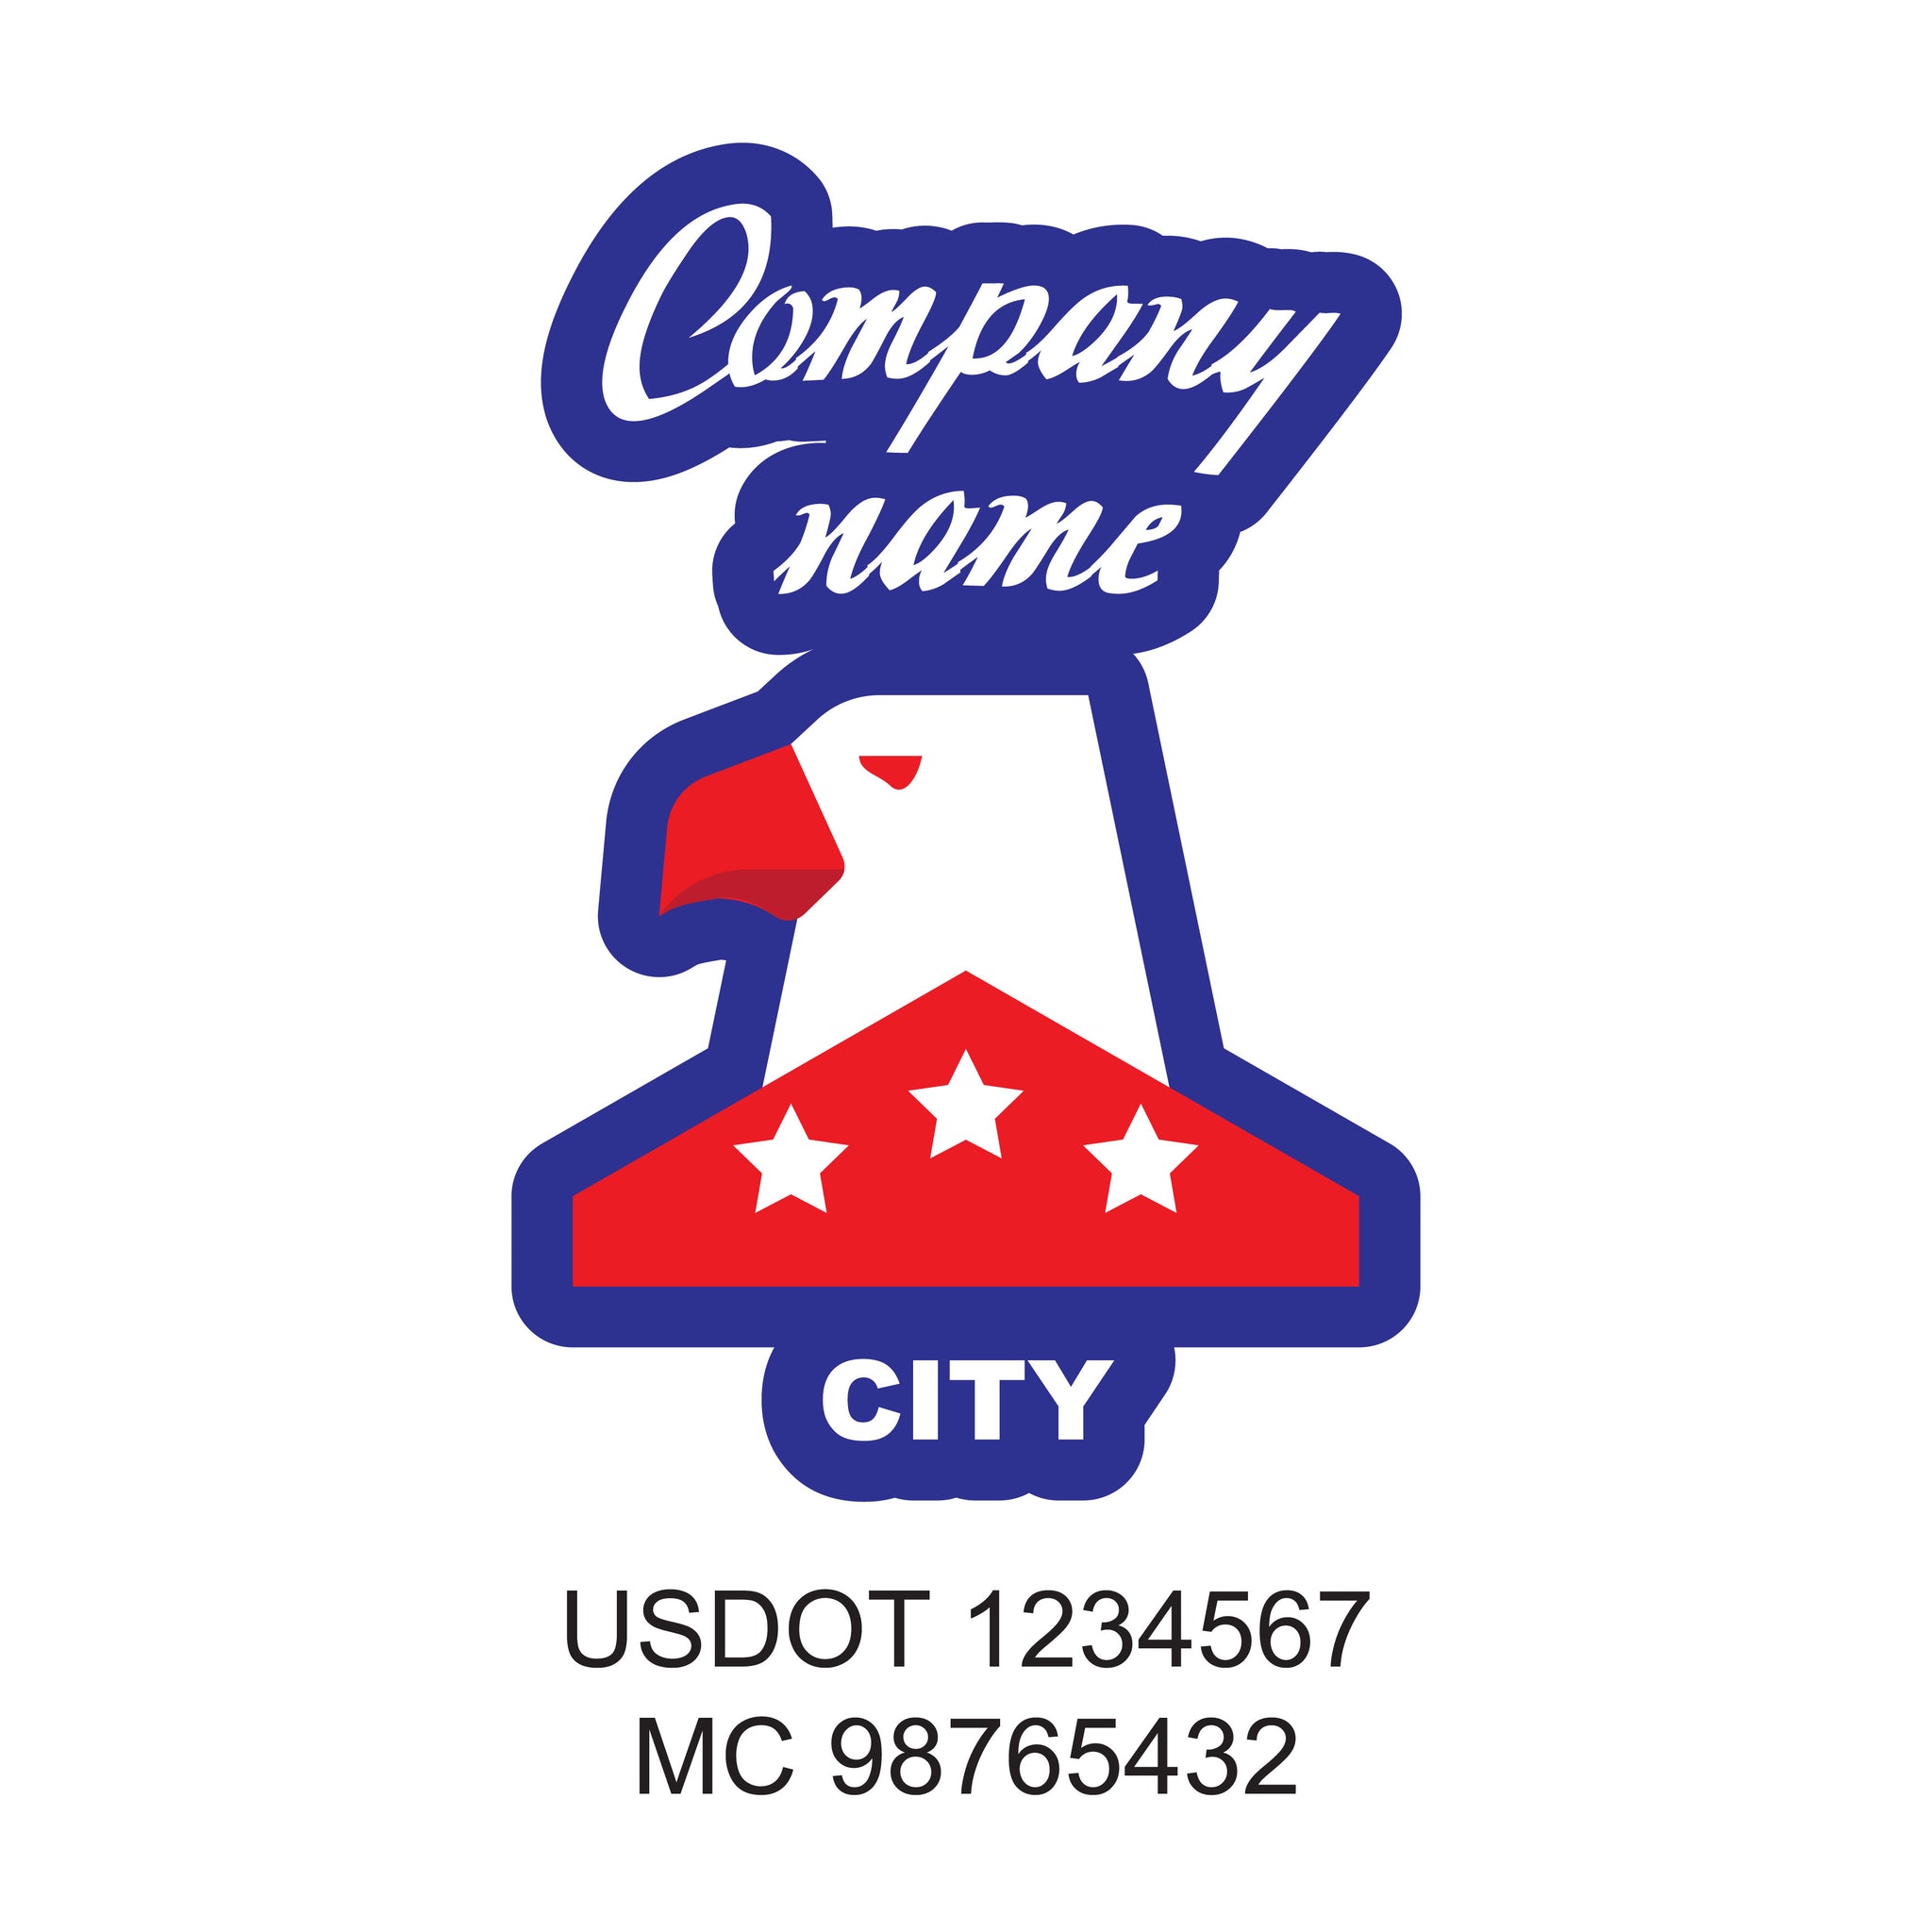 Patriotic company name Truck decal